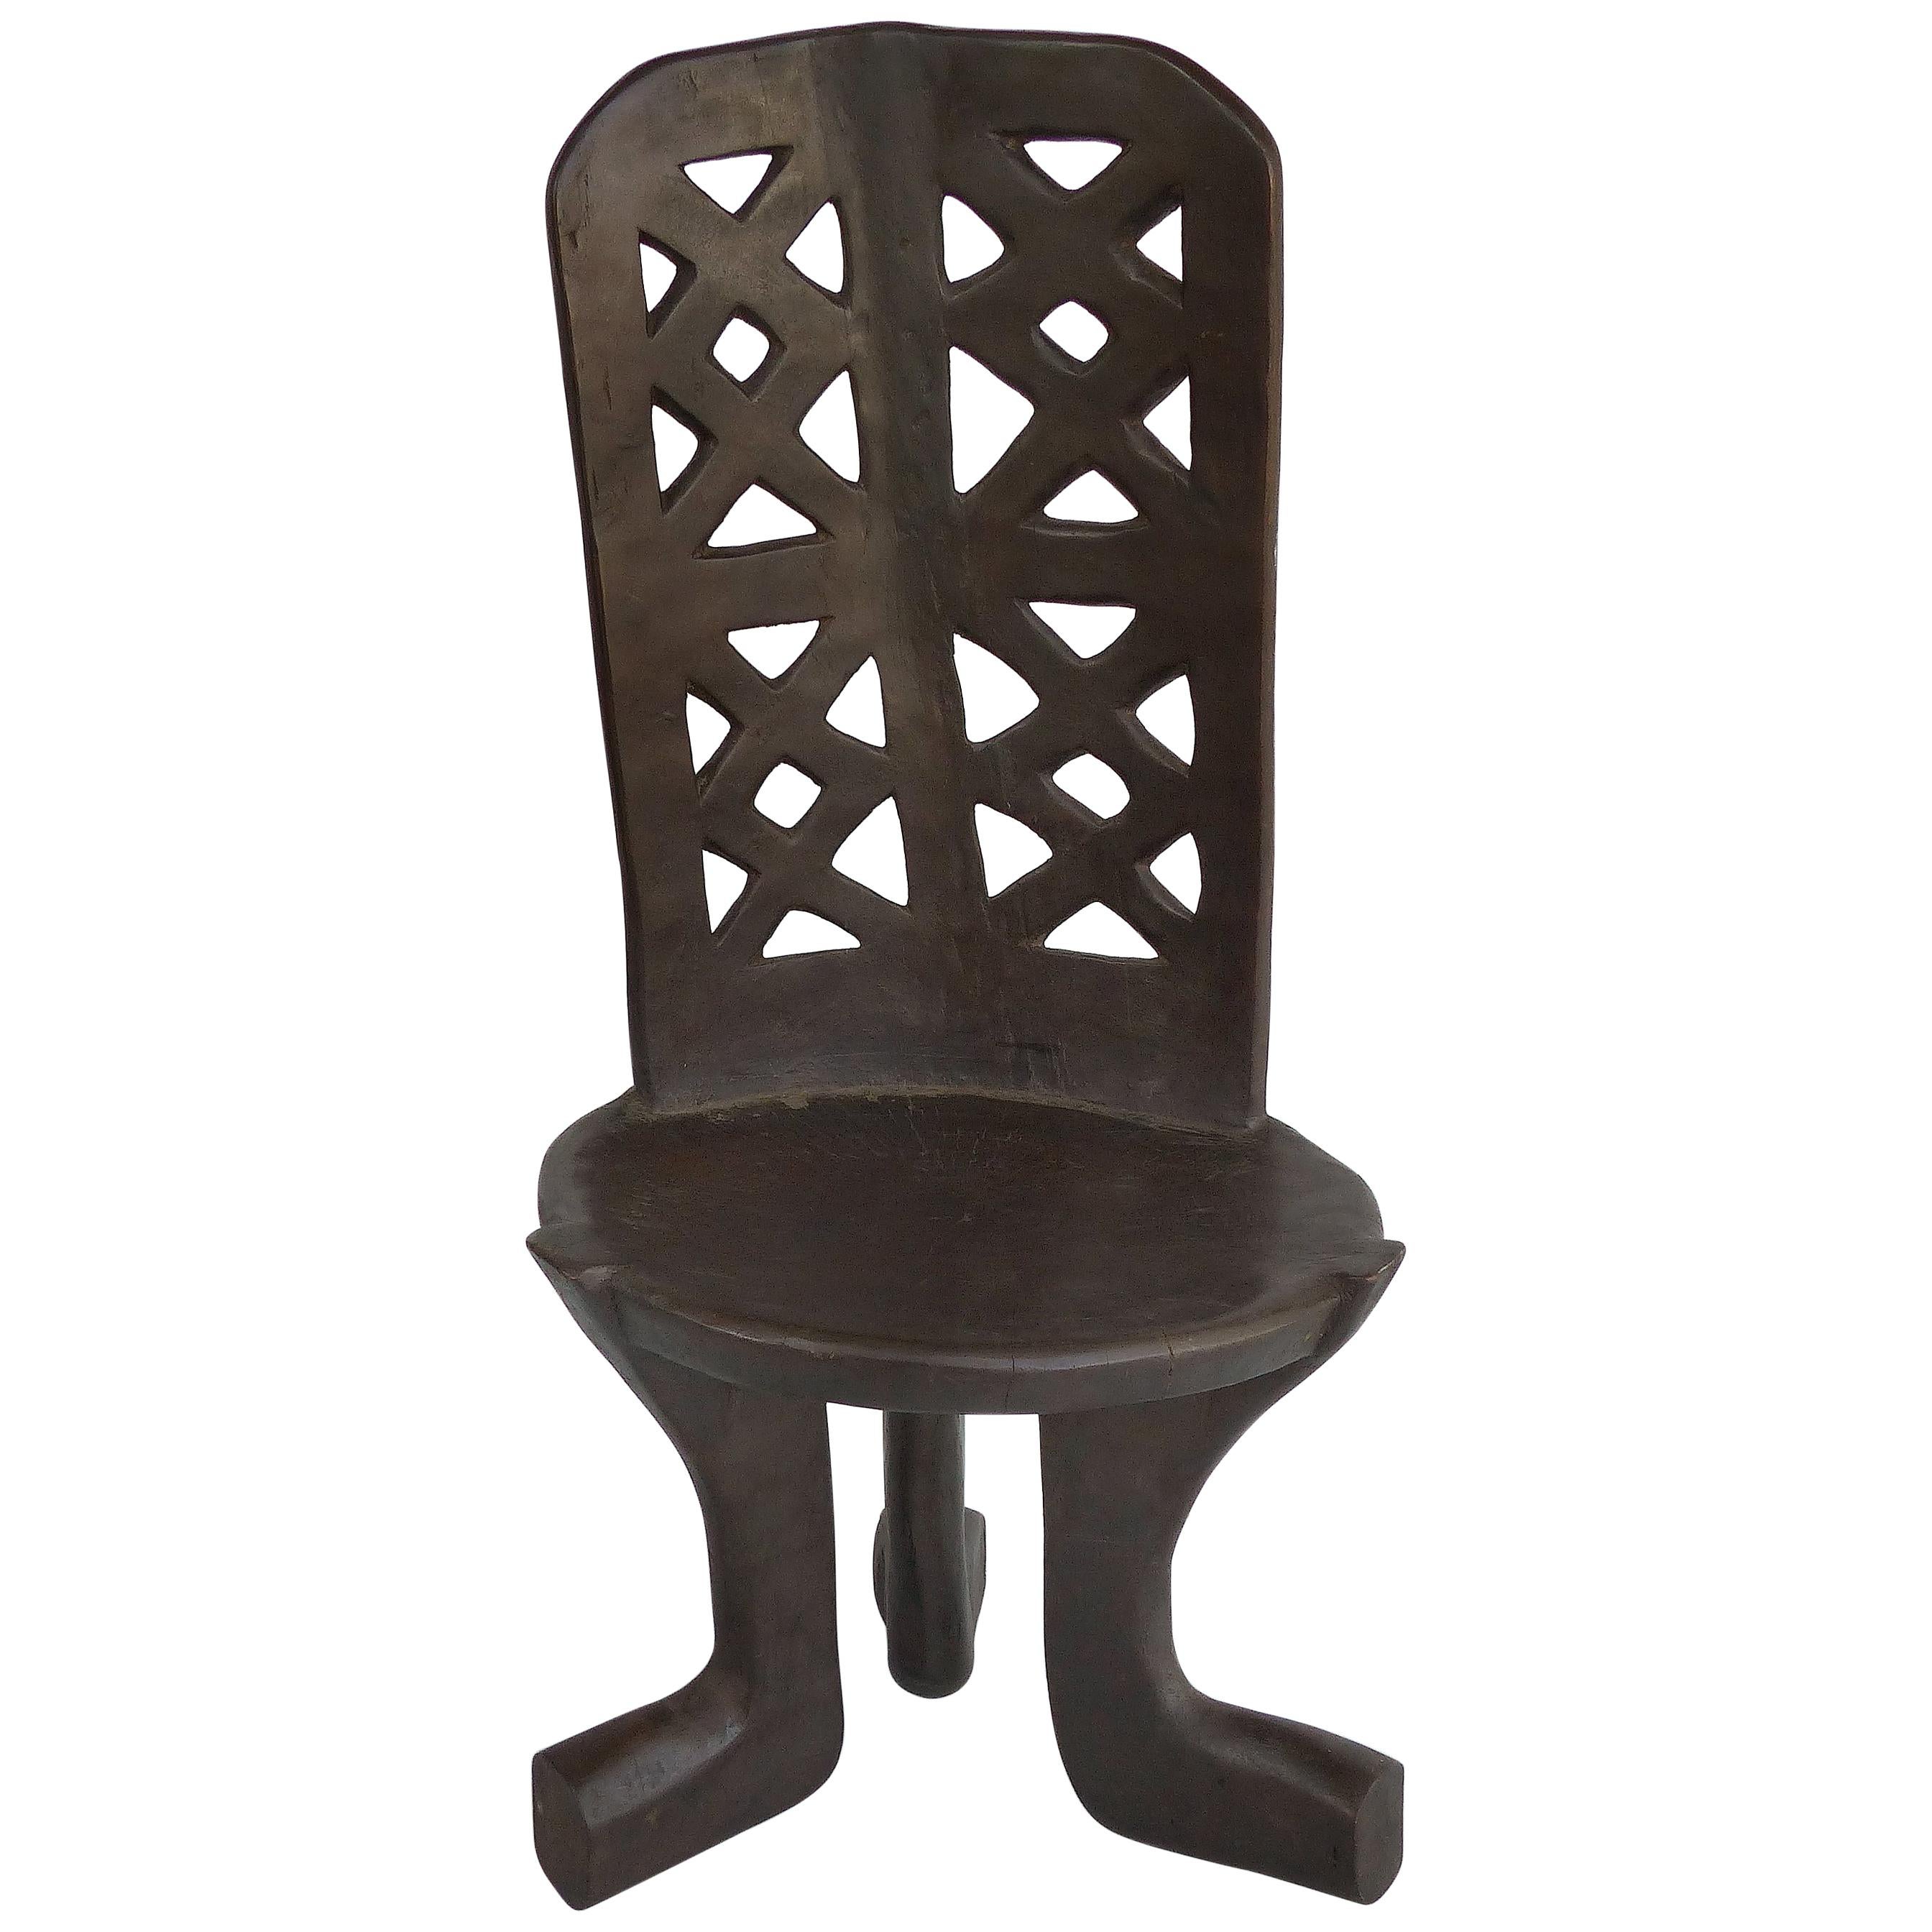 Rare Ethiopian Three-Legged Coptic Chair with Carved Crosses in Back Slat